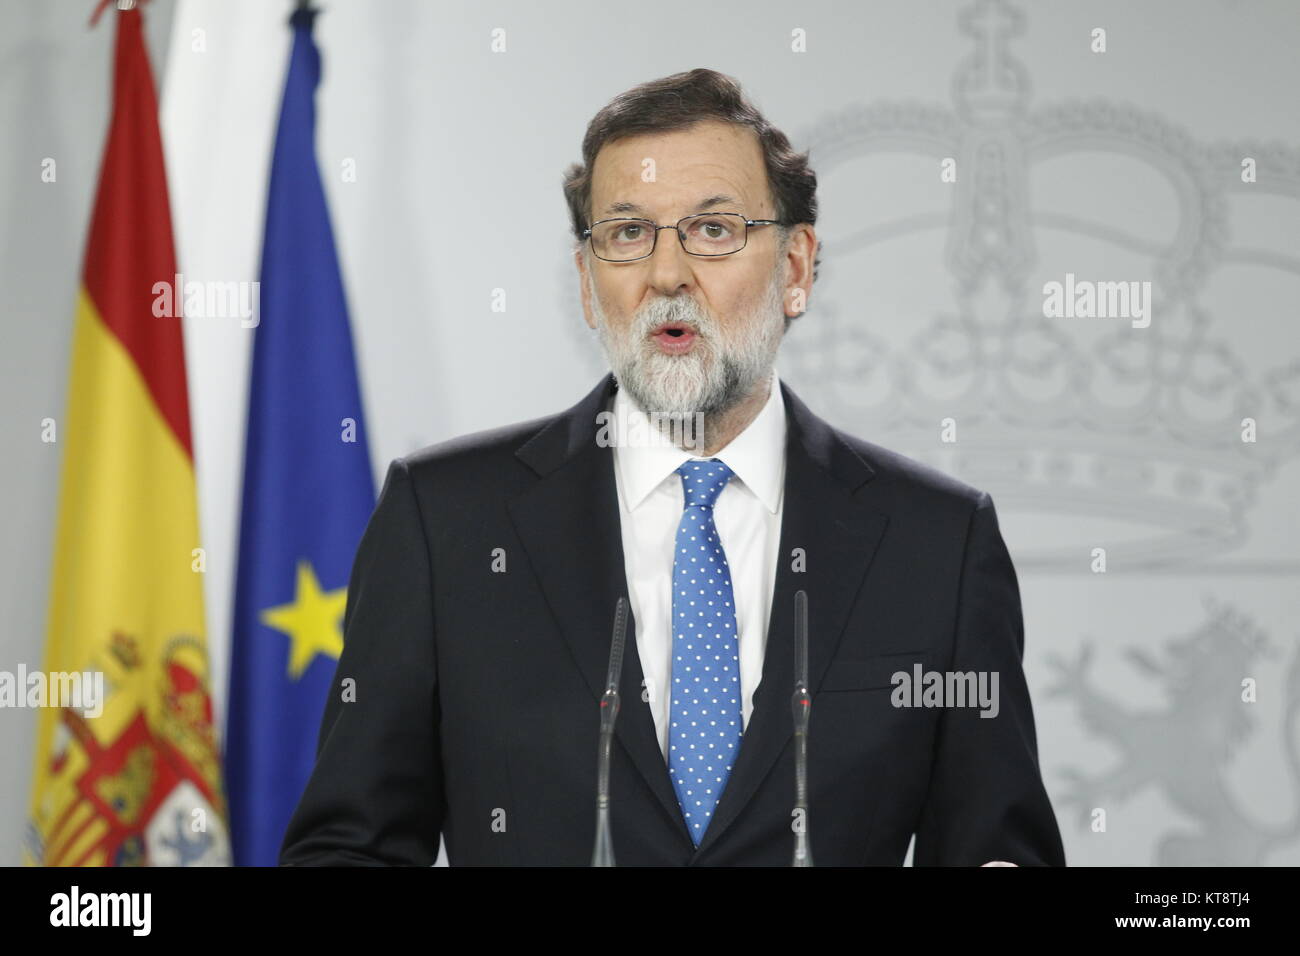 Madrid, Spain. 22nd December, 2017. Spain's Prime Minister Mariano Rajoy waits for the start of a Popular Party executive national committee meeting in Madrid, Spain, Friday, Dec. 22, 2017. Catalonia's secessionist parties won enough votes Thursday to regain a slim majority in the regional parliament and give new momentum to their political struggle for independence from Spain. Credit: Gtres Información más Comuniación on line, S.L./Alamy Live News Stock Photo